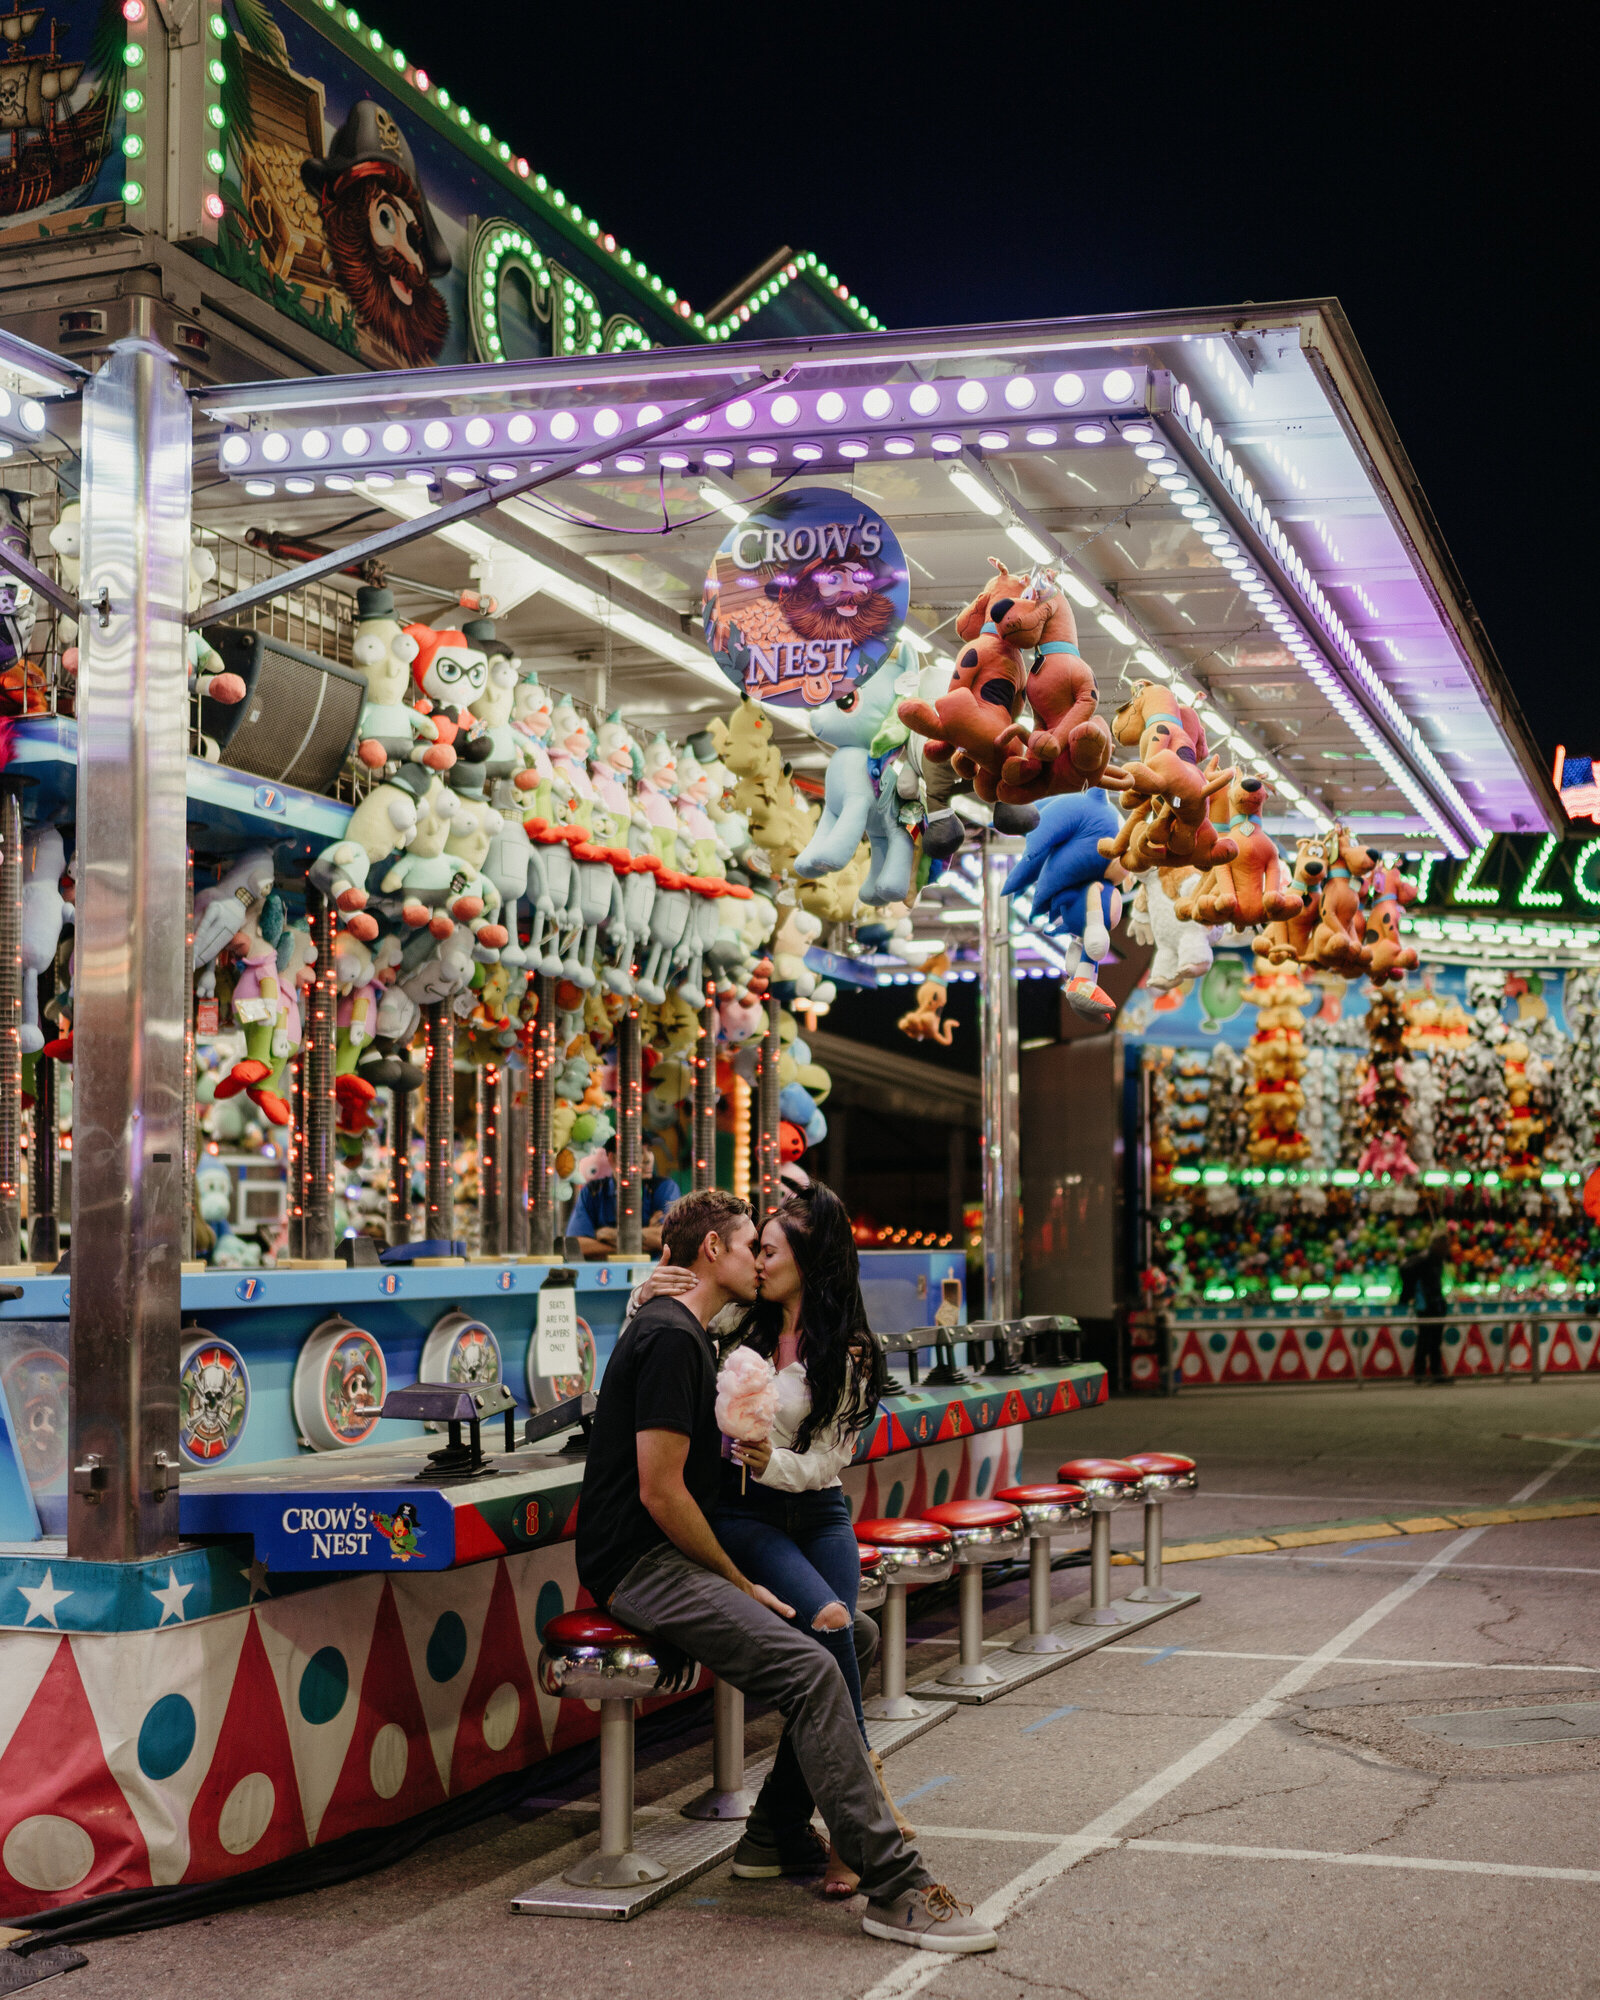 A couple share a kiss while at a carnival.